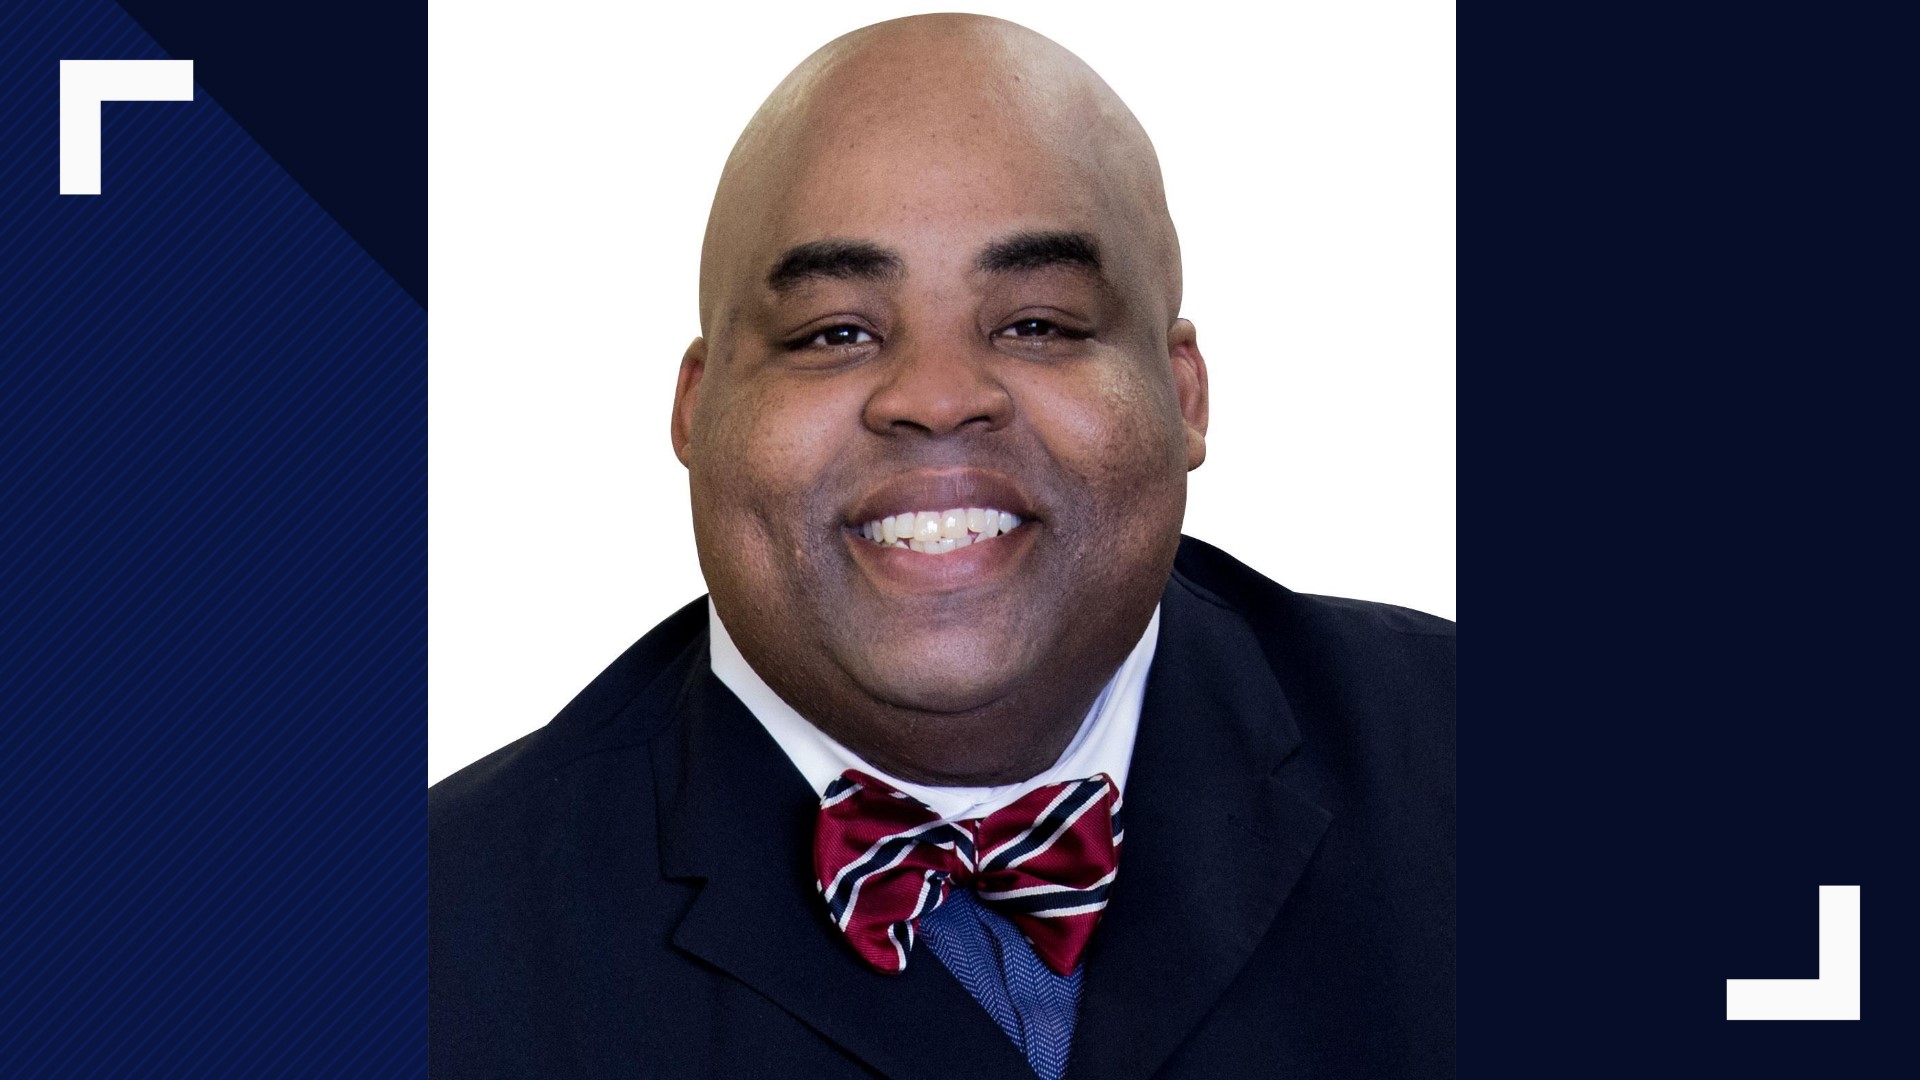 Dr. Marcus Nelson was arrested Wednesday night on a misdemeanor charge of possession of marijuana under 2 ounces. The Waco ISD board said it will hold a special meeting with Nelson on March 19. ISD president Pat Atkins said the district wants to hear from him before rushing to judgement.